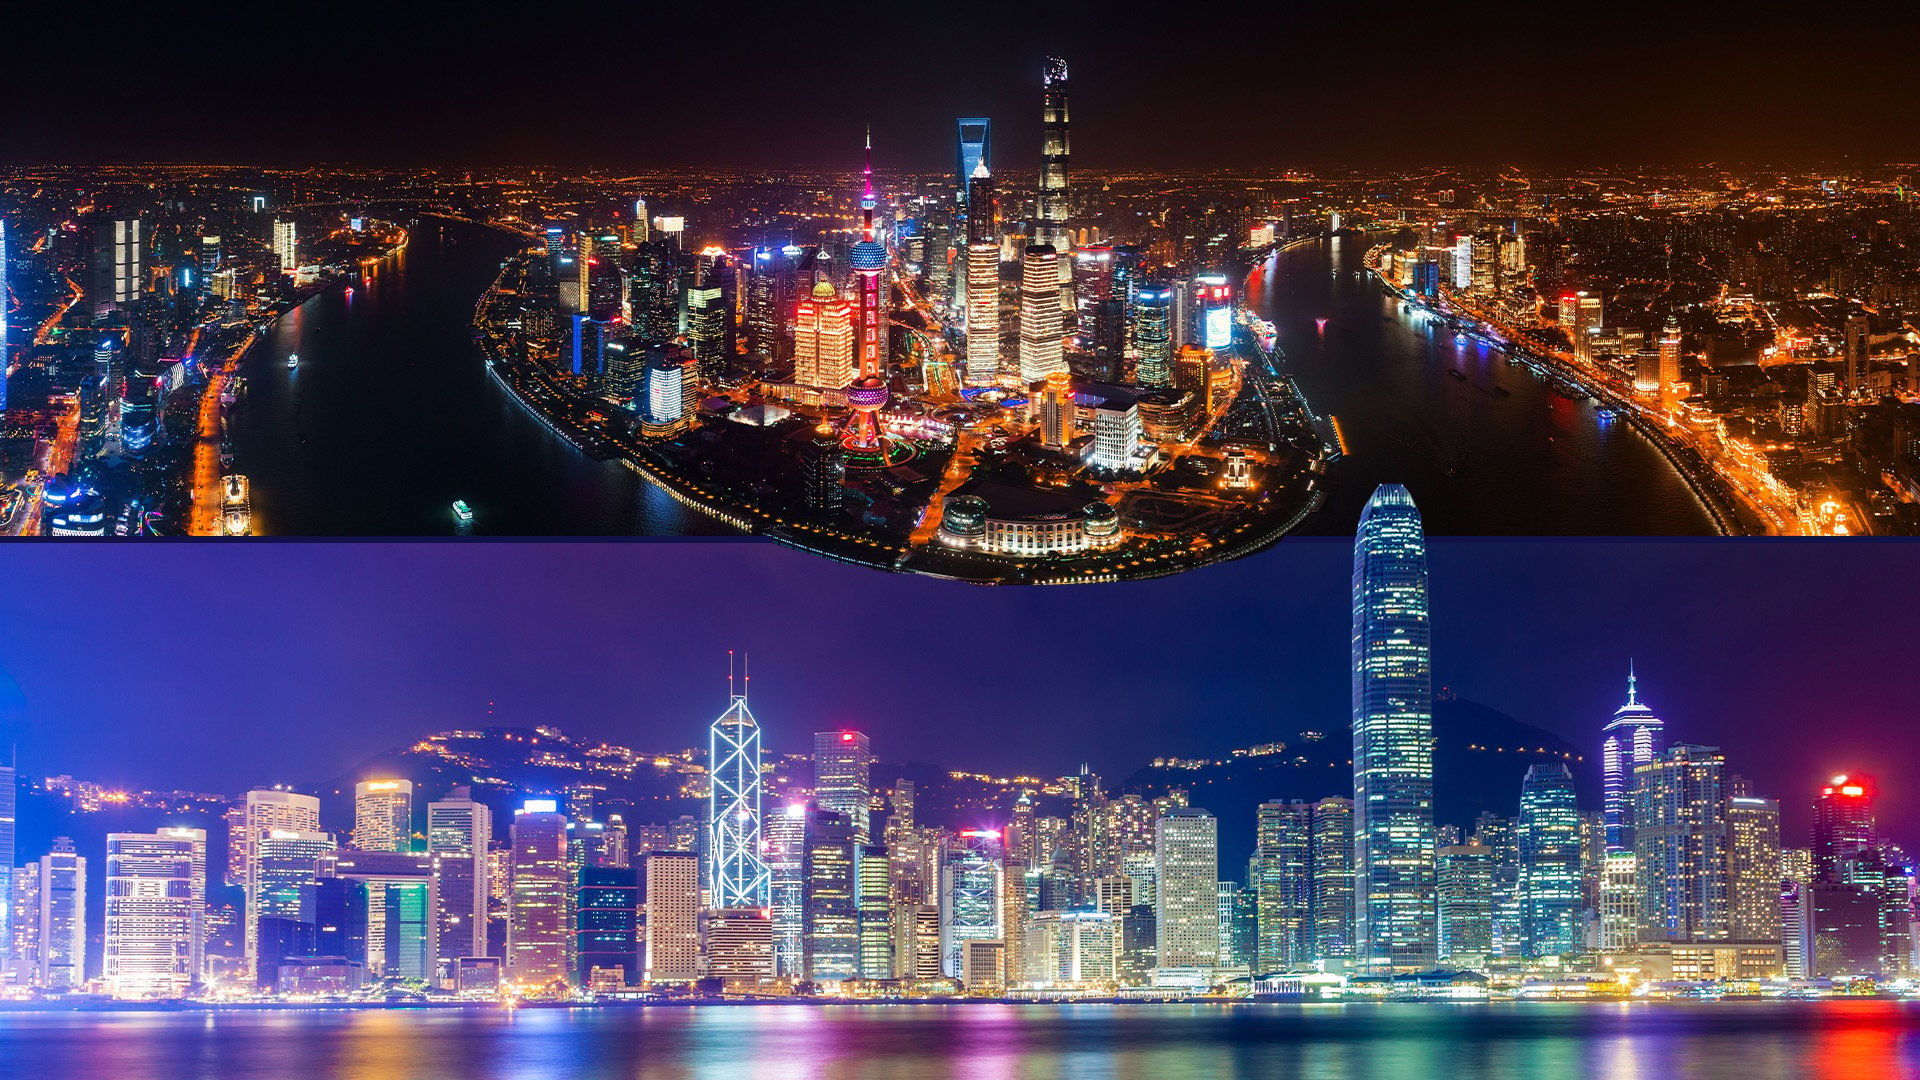 “Shabby” Hong Kong or “over-lit” Shanghai, a debate is raging on social media over which city looks best at night. Photo: SCMP composite/Shutterstock